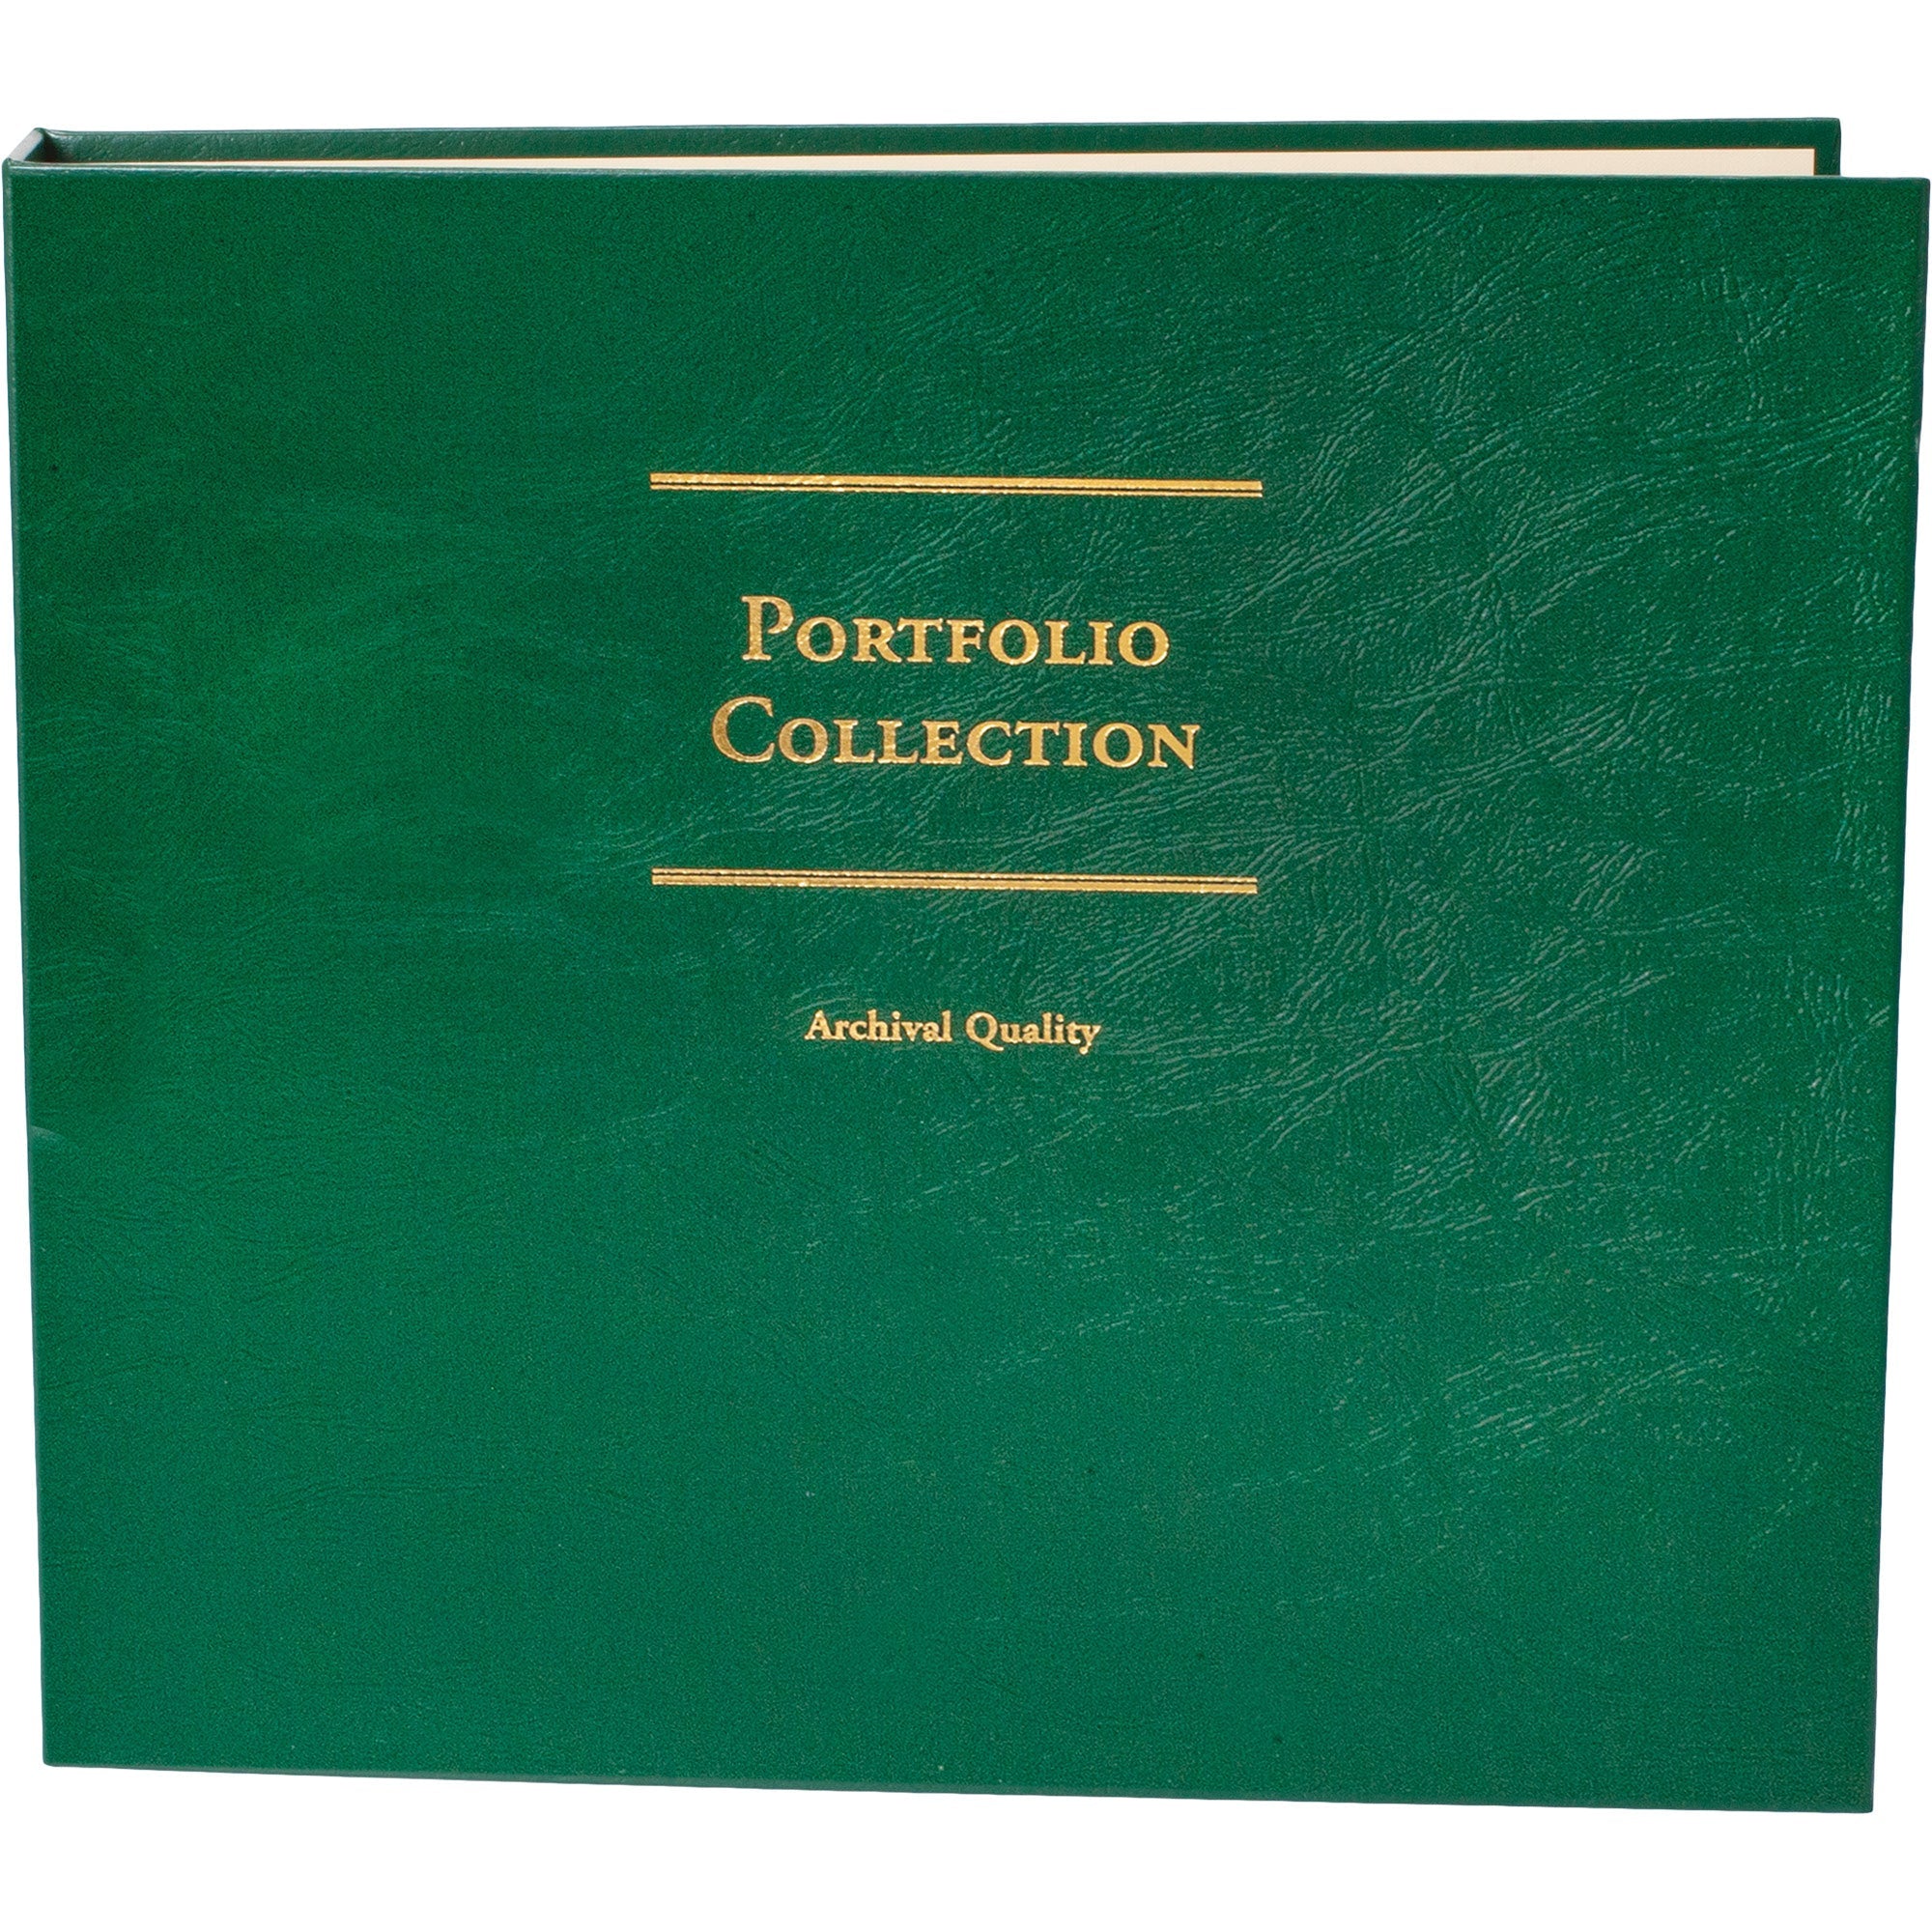 Collection Portfolio for 2" x 2" Holders Littleton Coin Company